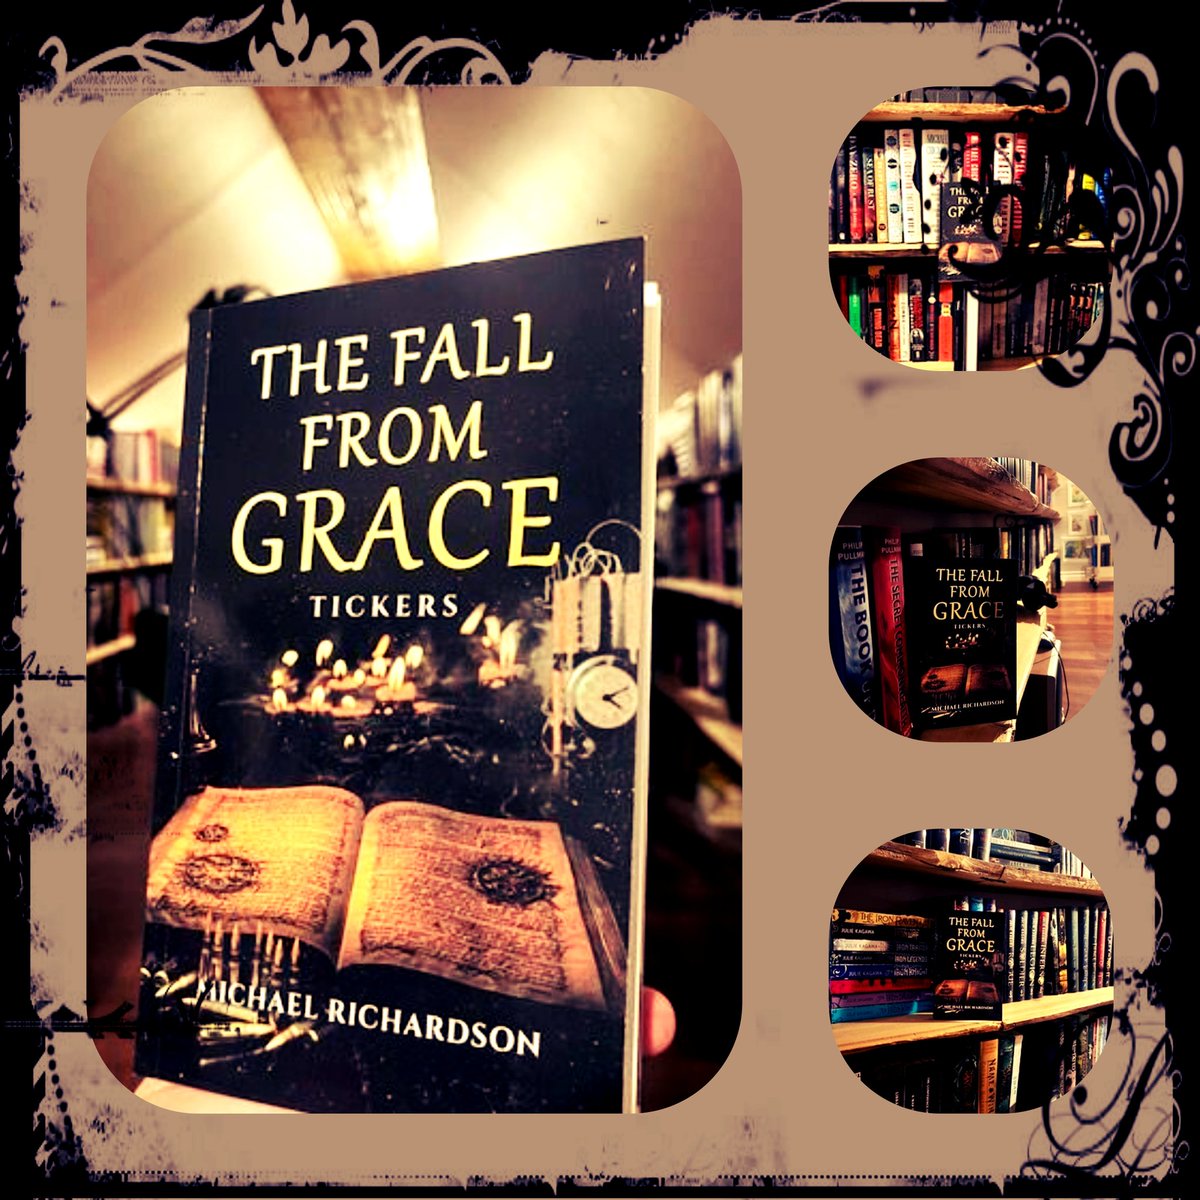 Where do you keep your copy of your books once they are read??
mrichardsonauthor.com

#read #writers
#greatbooks #books #support #Canadianwriters  #tickers #thefallfromgrace 
@RafeoNijs